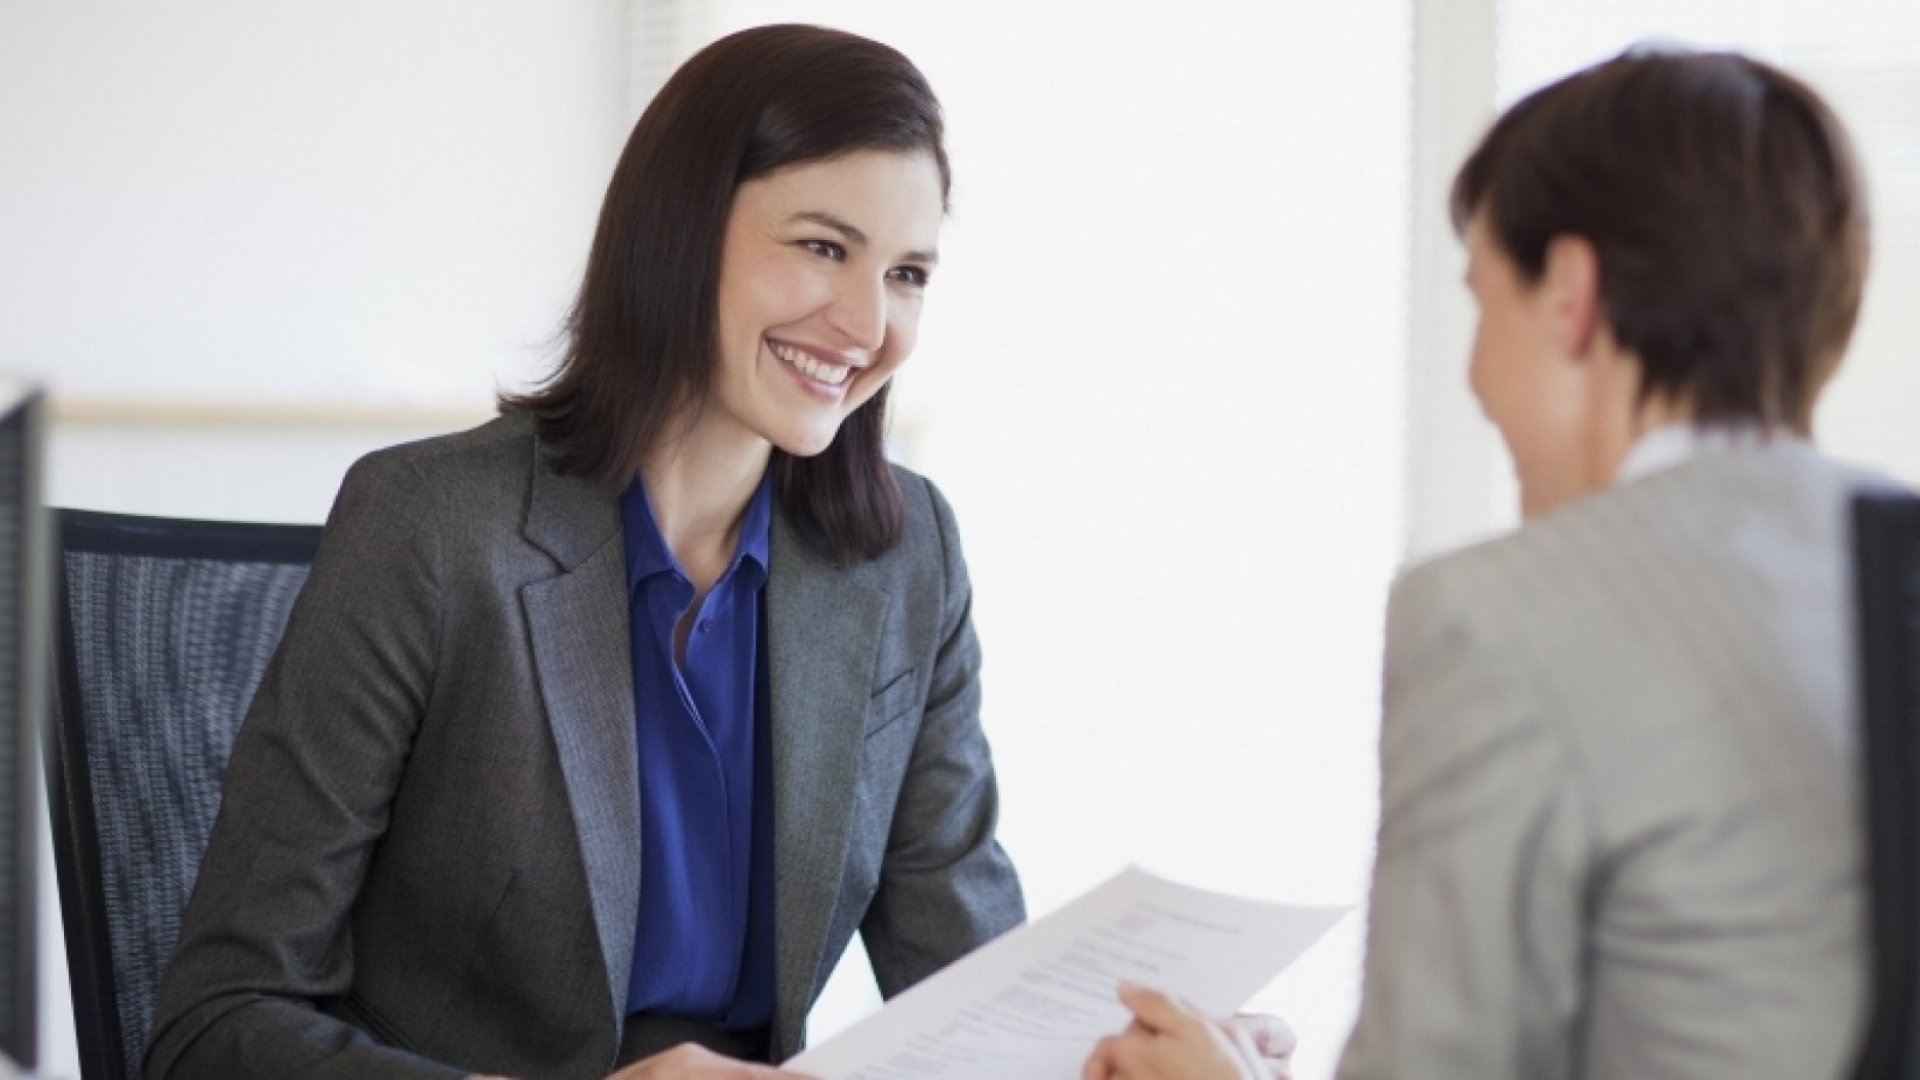 Interview Tips: 10 ways to improve your interview performance